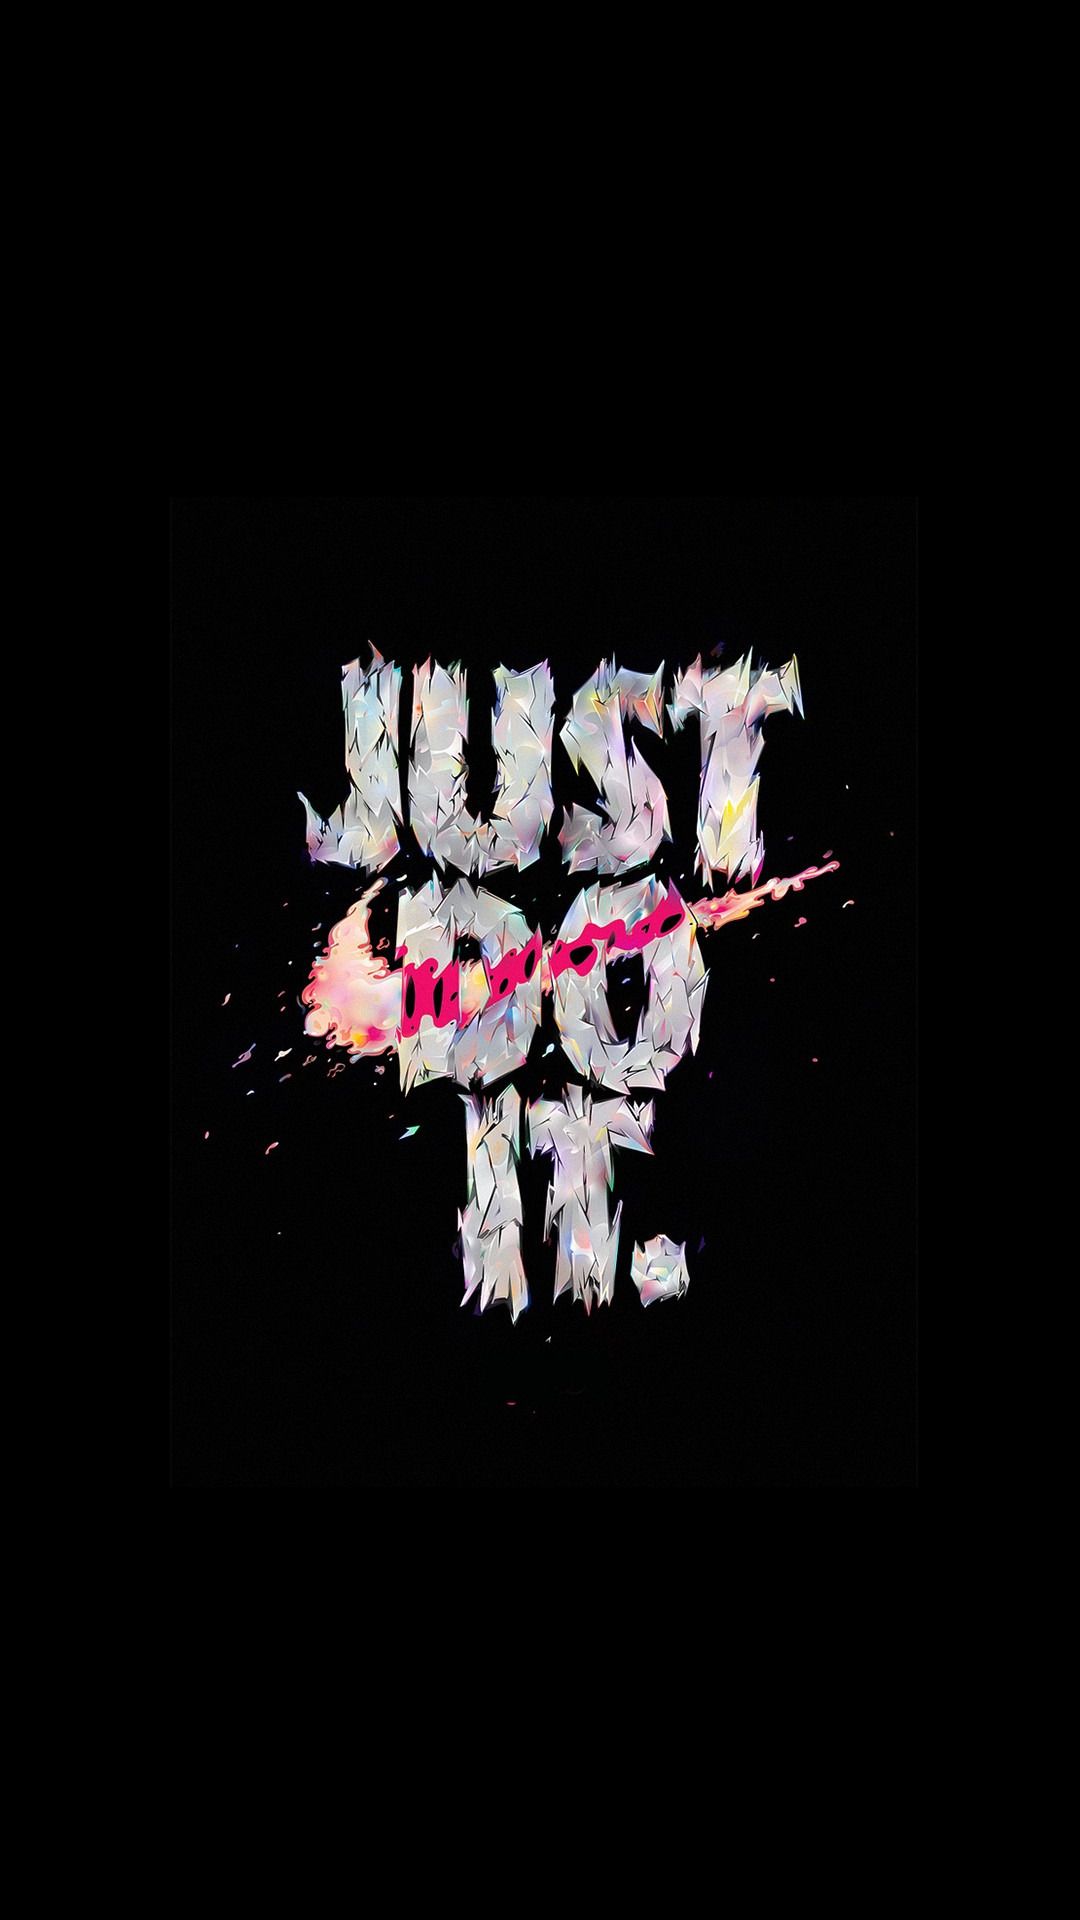 Just do it wallpaper for Iphone and desktop